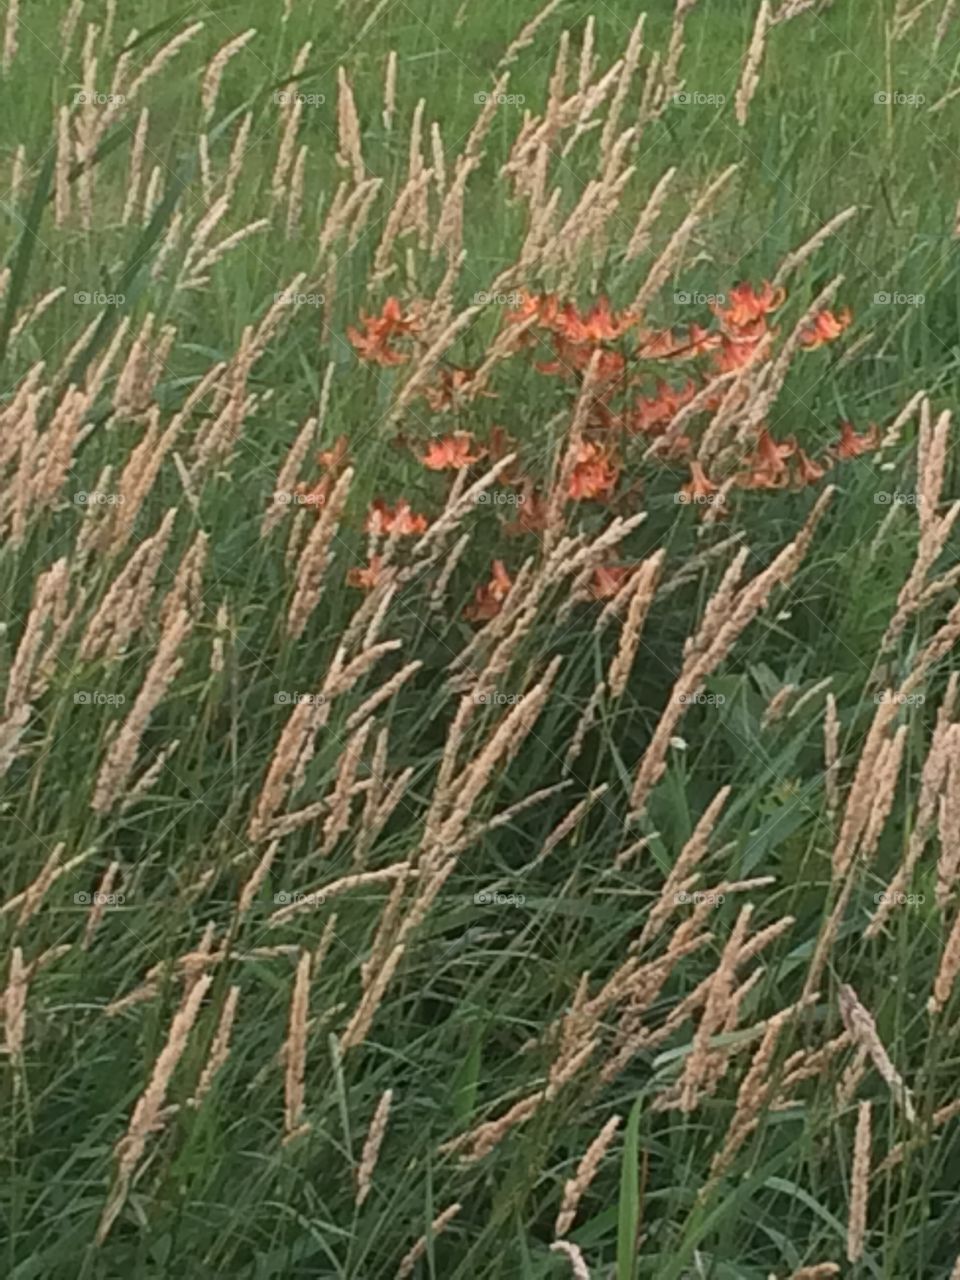 Flowers of the field